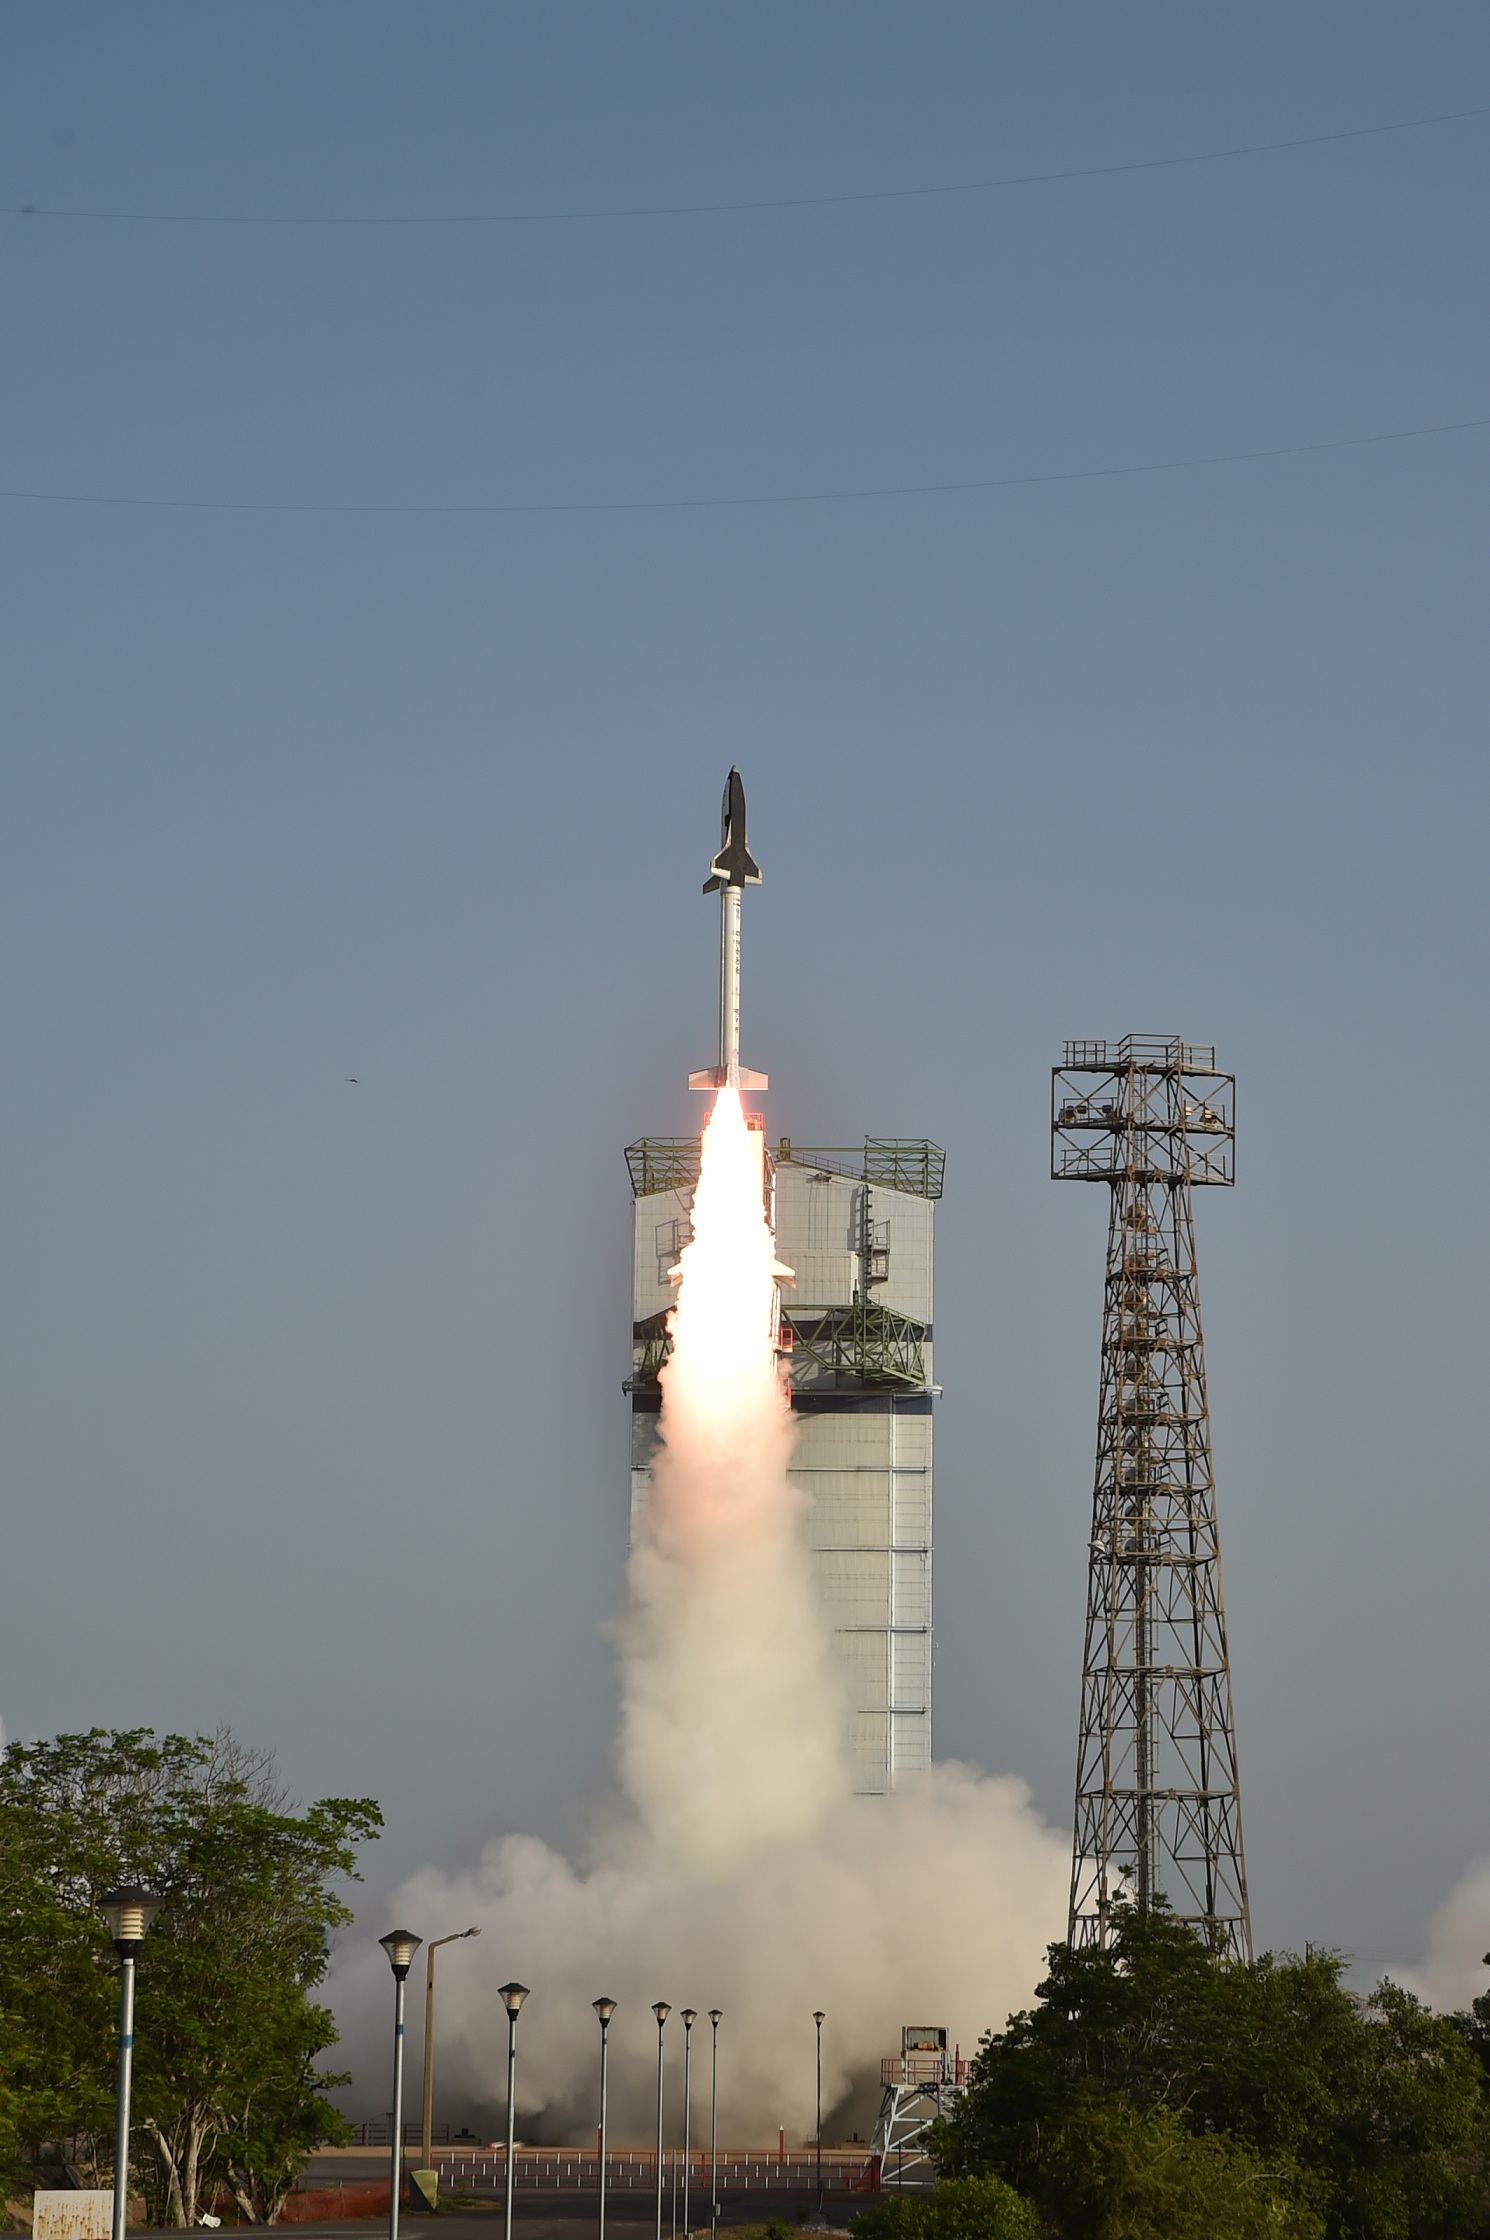 The Images From India’s First Ever Space Shuttle Launch Are Astonishing